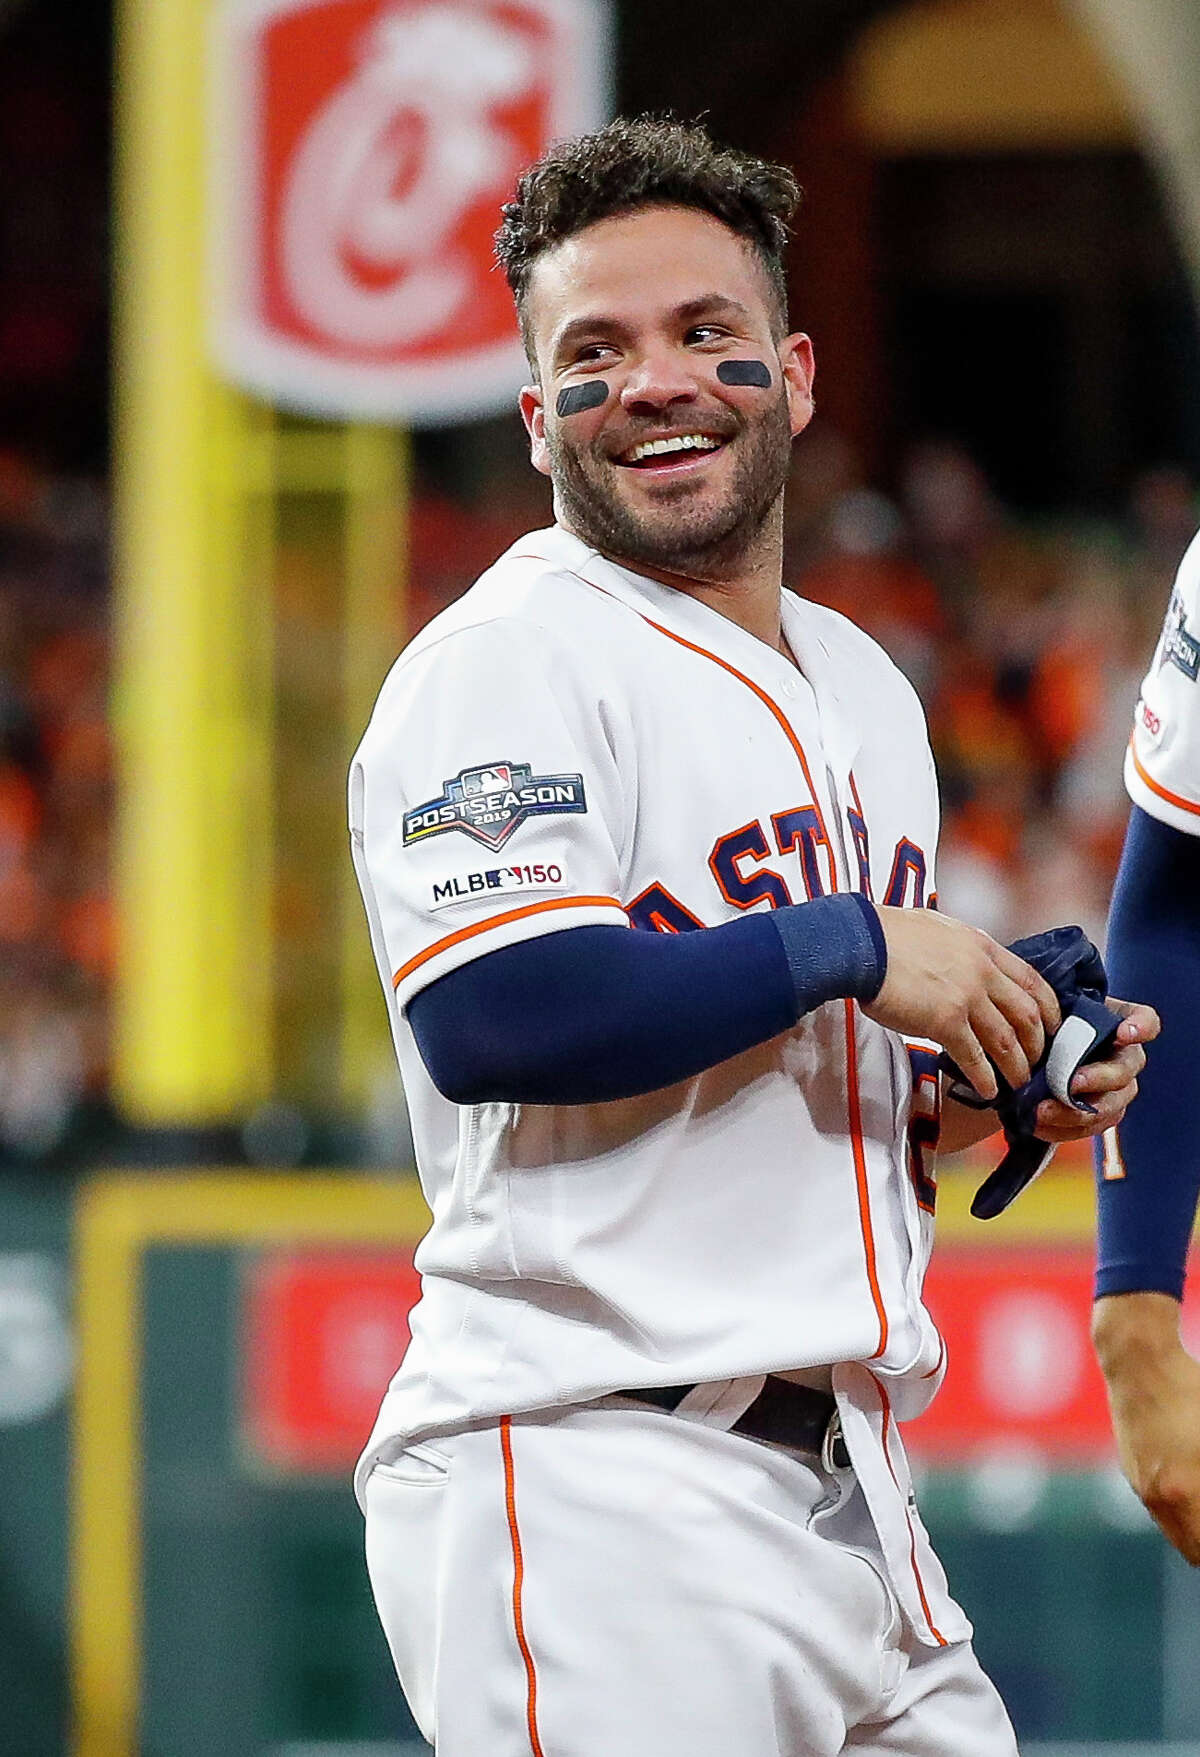 Lead the way. Be a role model': José Altuve wrote inspiring letter before  last World Series run